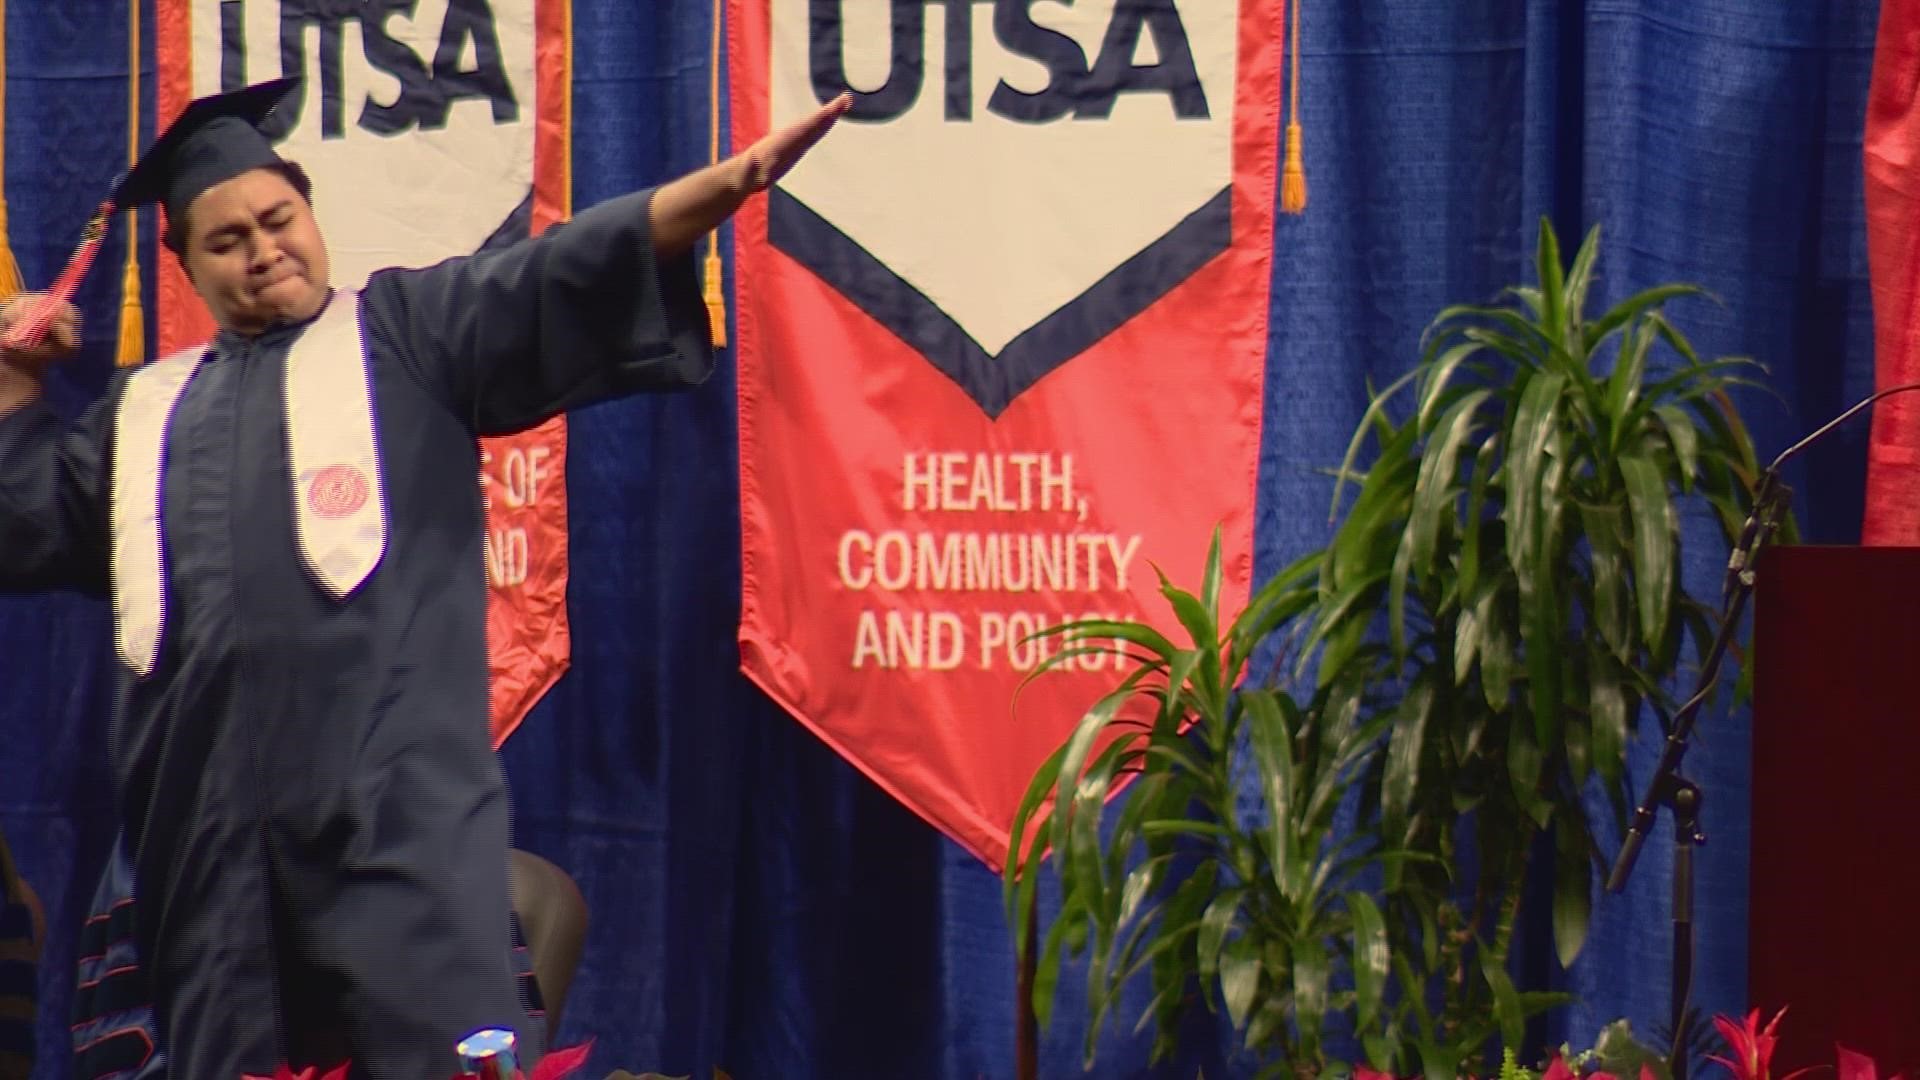 Thousands of UTSA graduates received their diploma at a ceremony in downtown San Antonio.